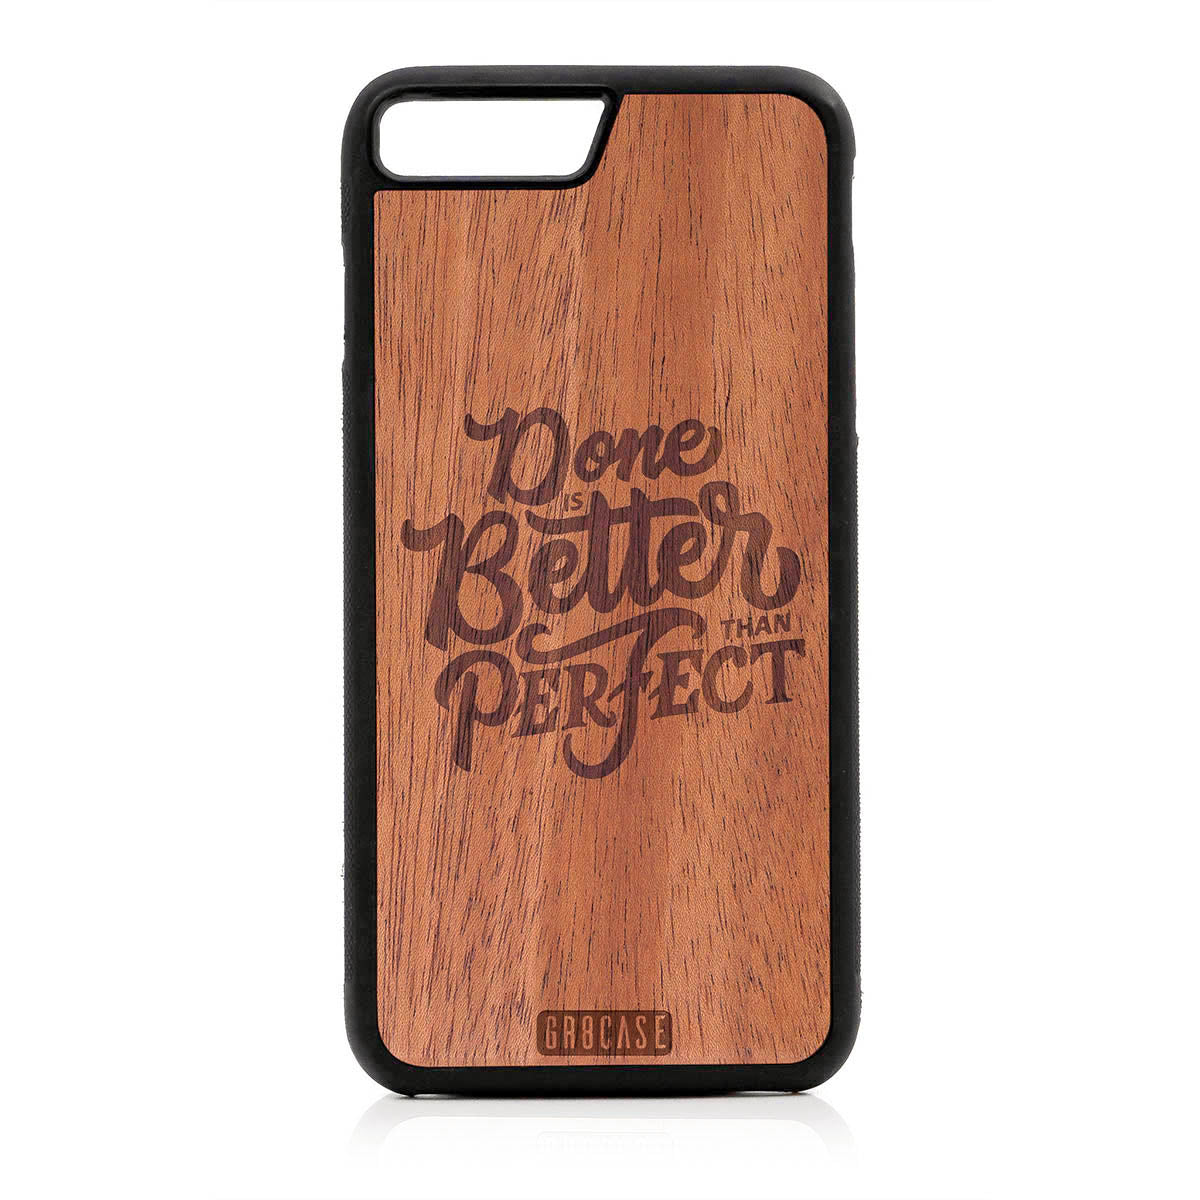 Done Is Better Than Perfect Design Wood Case For iPhone 7 Plus / 8 Plus by GR8CASE